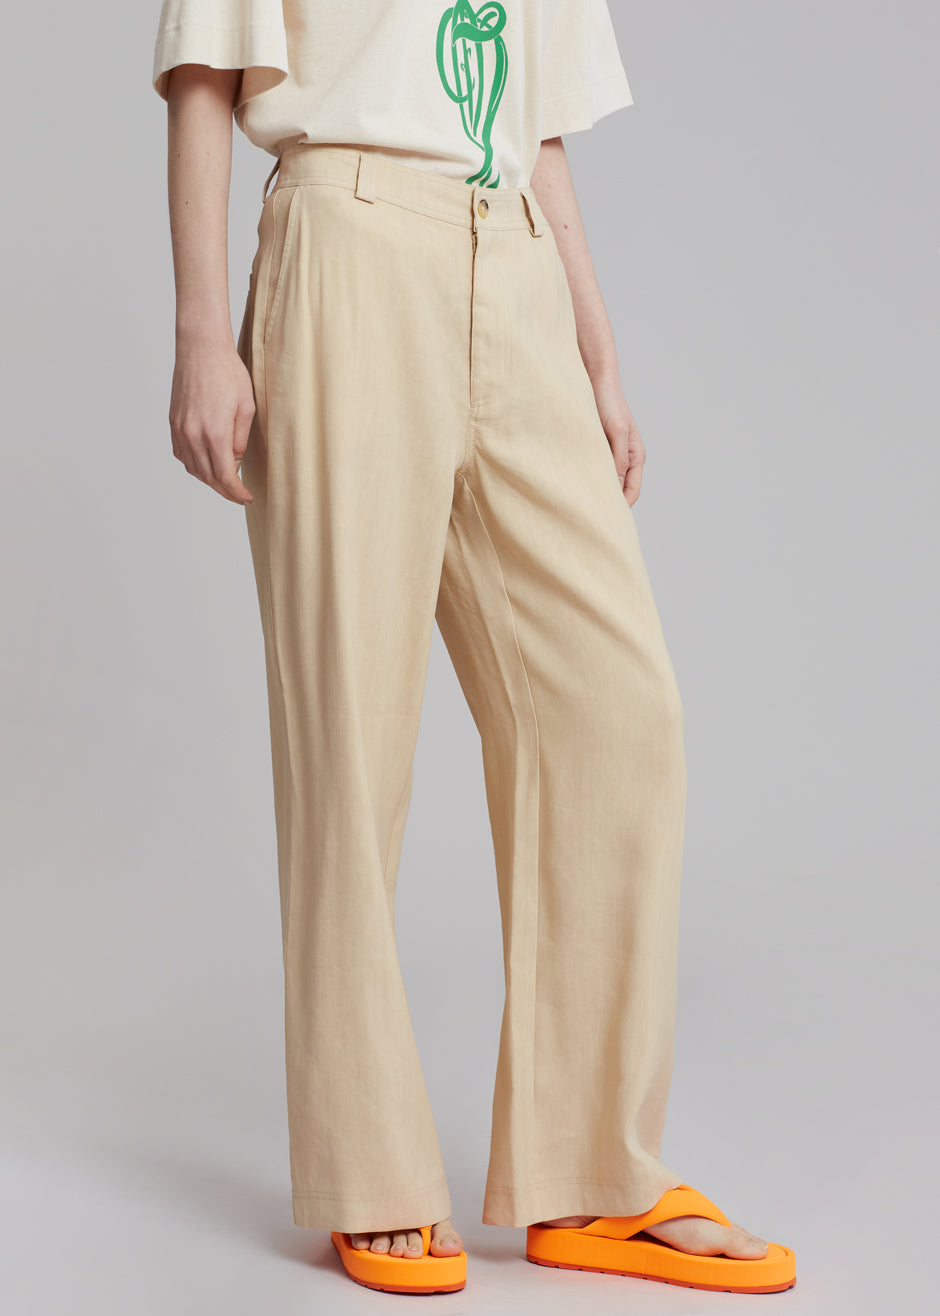 Rodebjer Annie Pants - Warm Sand - 4